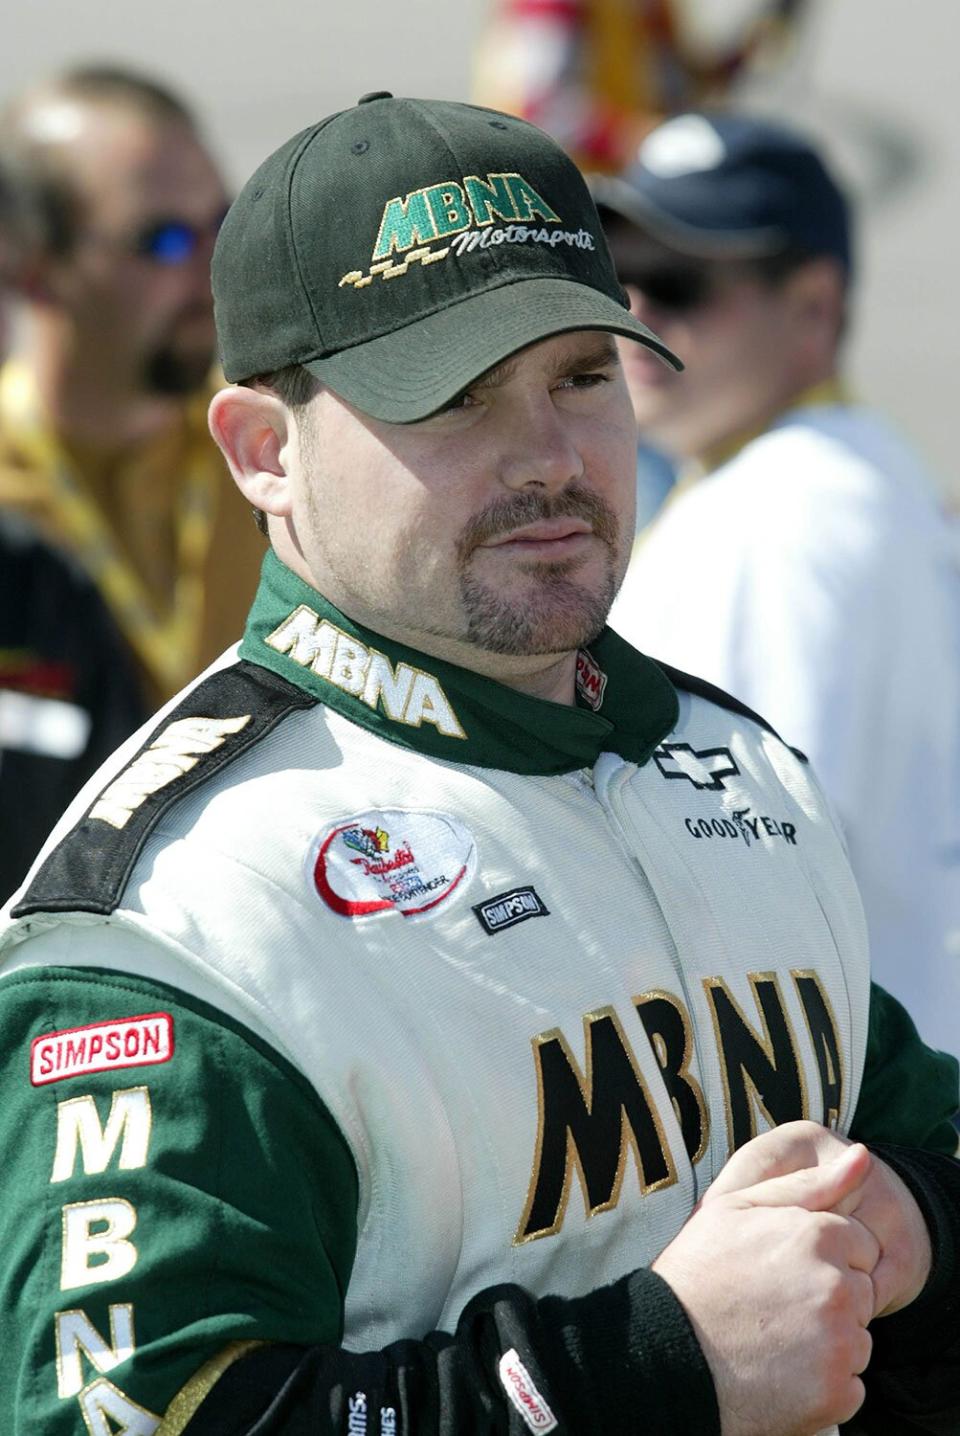 4 Oct 2003: Coy Gibbs during the Busch Series Mr. Goodcents 300 race Oct 4, 2003 at Kansas Speedway in Kansas City, Kansas. (Photo by Albert Dickson/Sporting News via Getty Images via Getty Images)